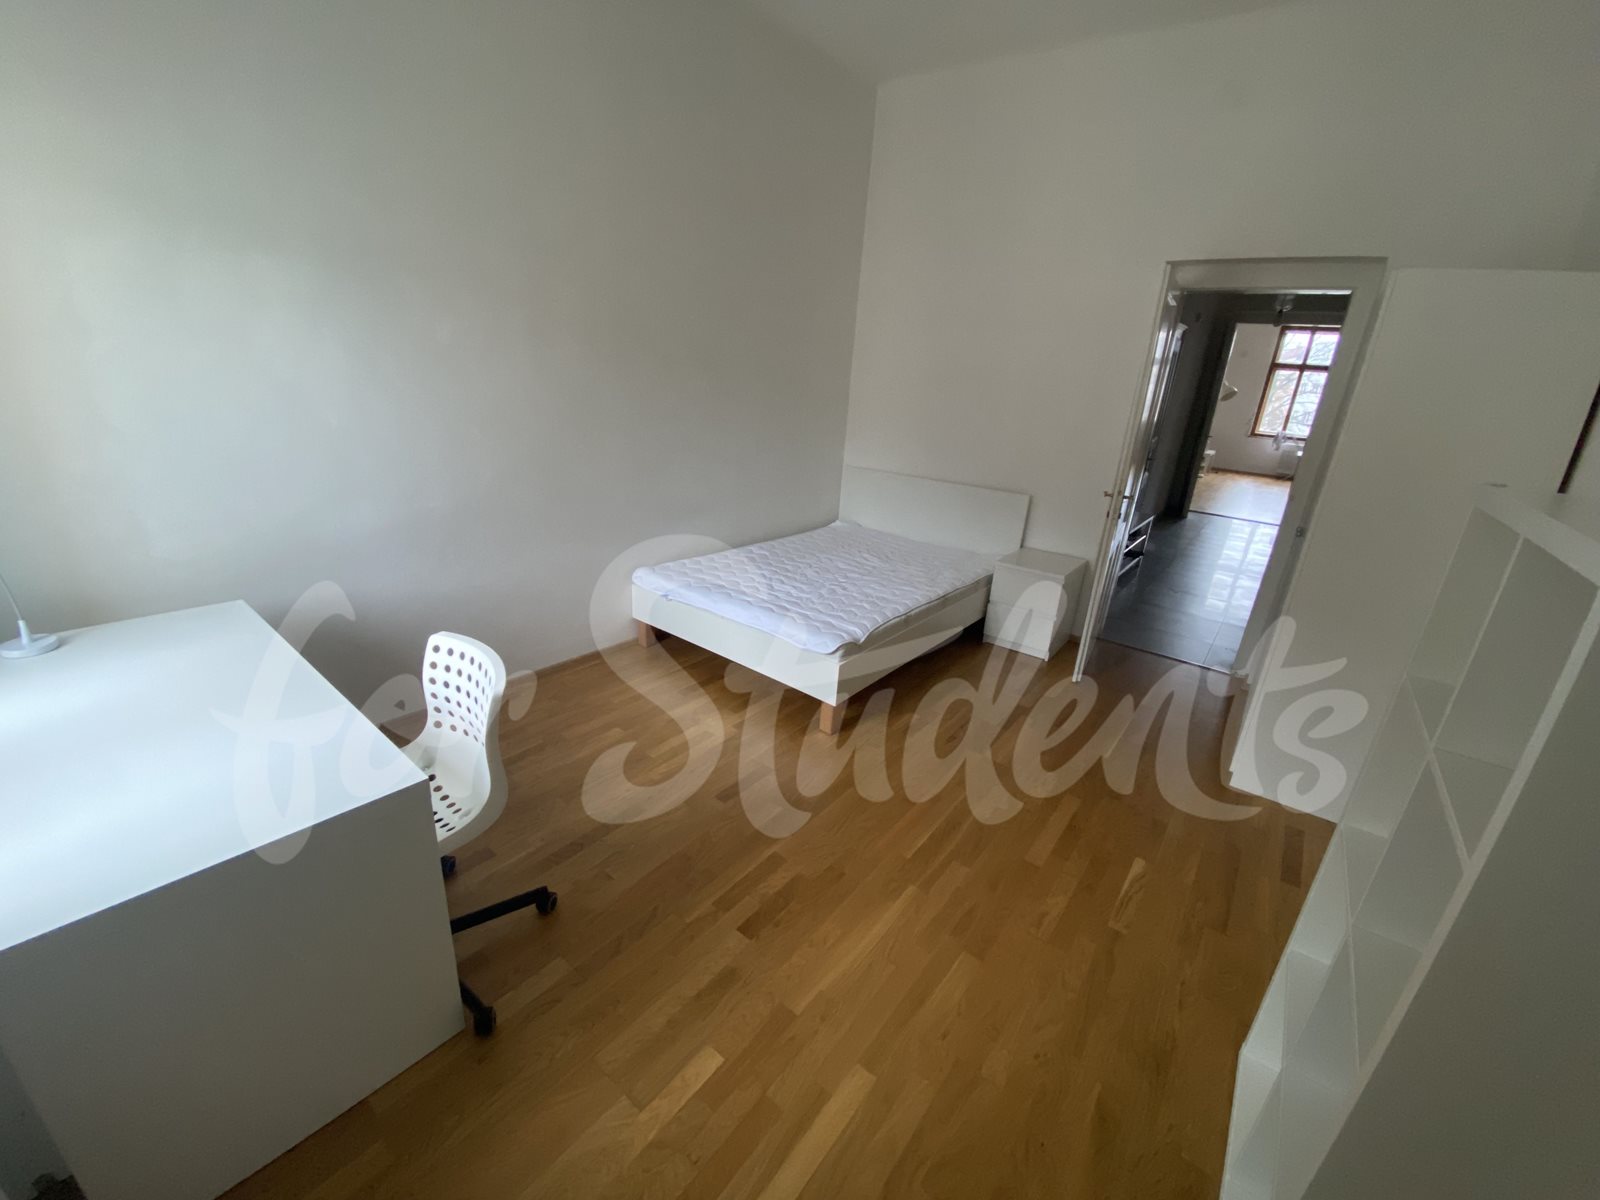 One bedroom available in female 3bedroom apartment in a student's house in the center of town, Hradec Králové